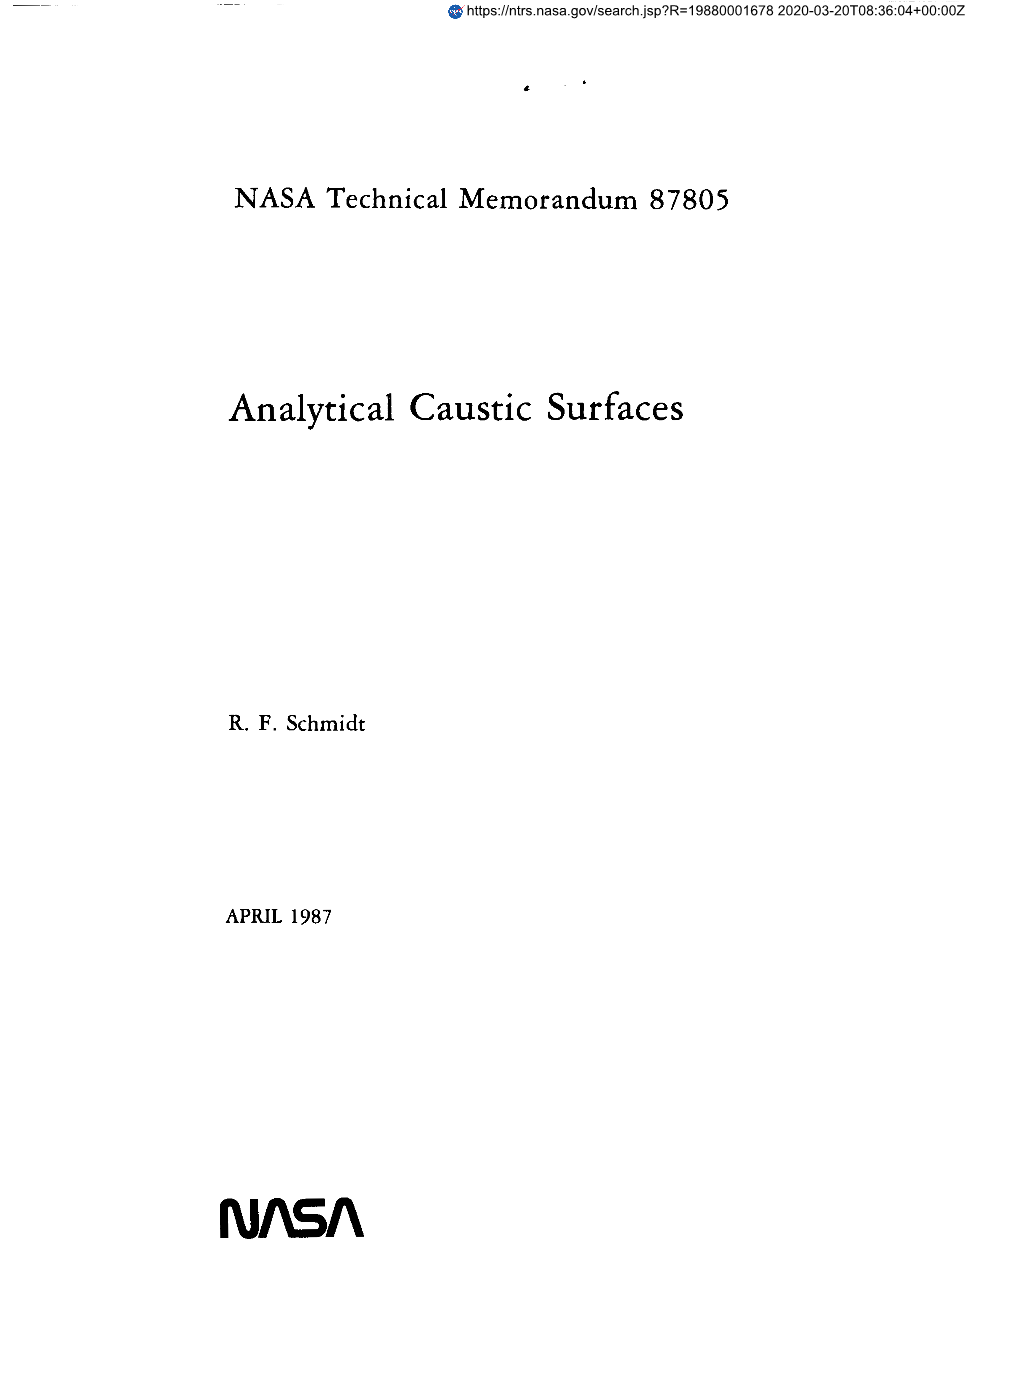 Analytical Caustic Surfaces